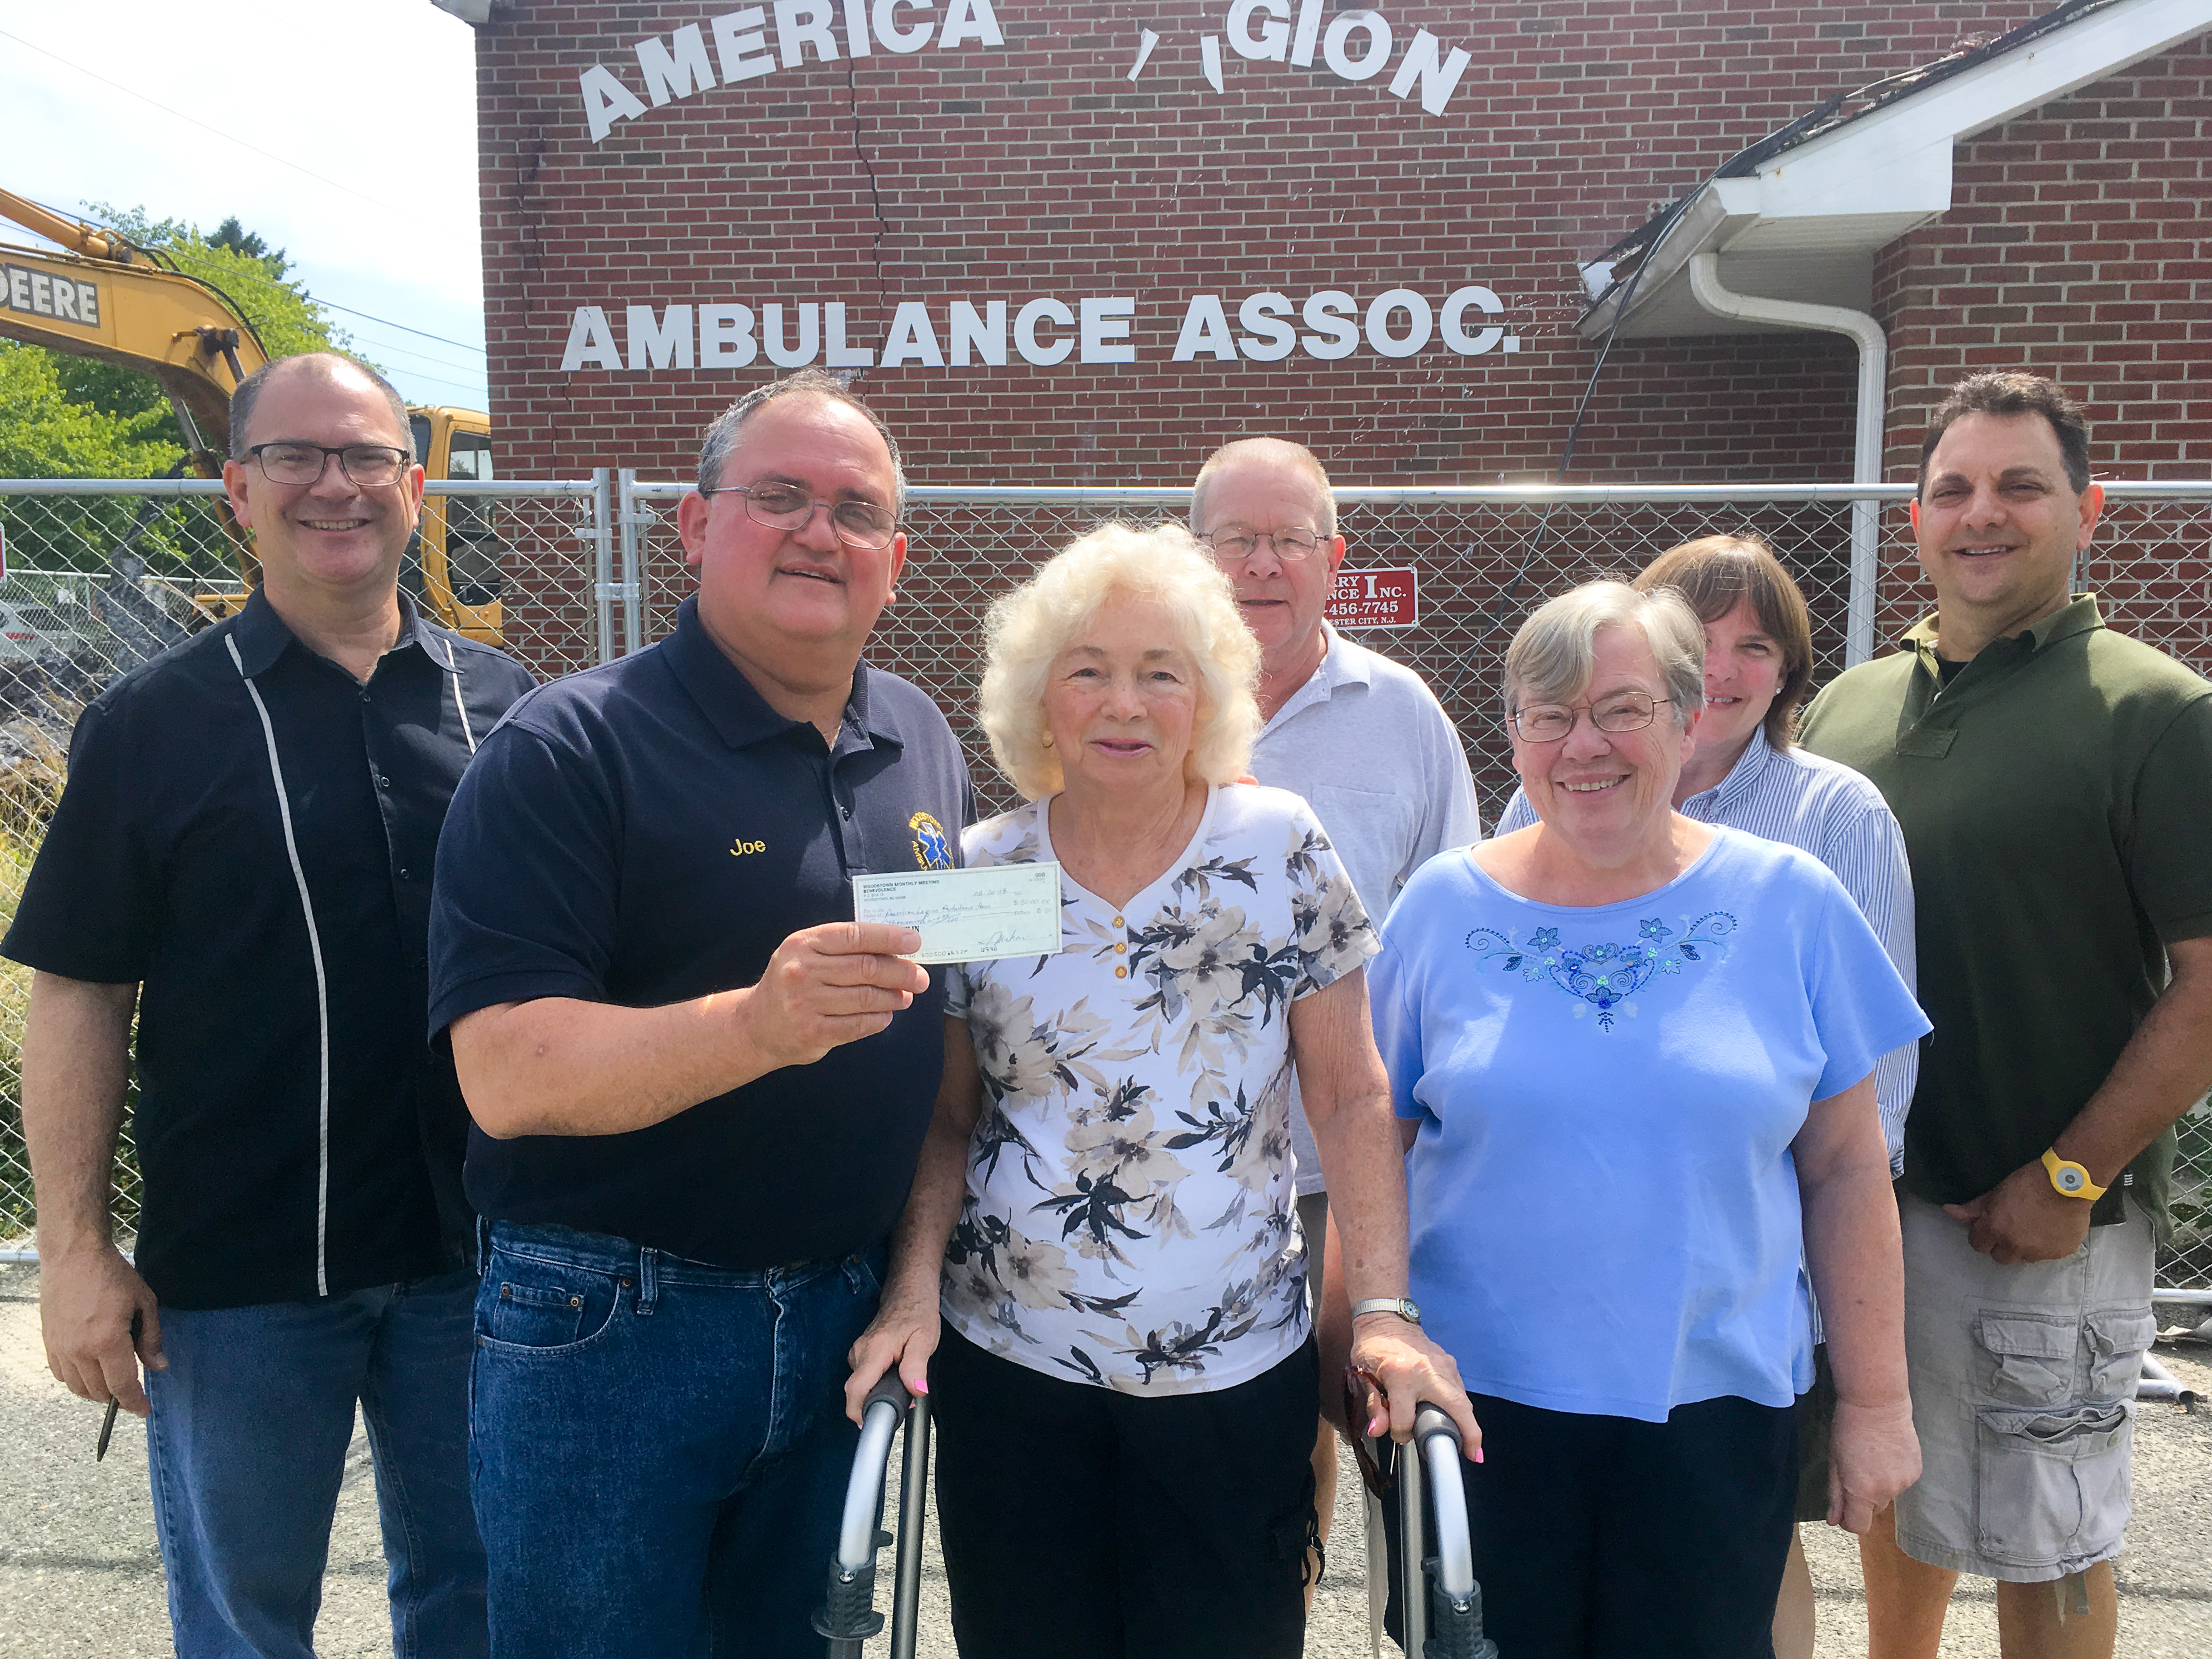 Woodstown Friends Meeting’s Strawberry Supper Raises $5K for Fire-Stricken South Jersey Ambulance Assoc.